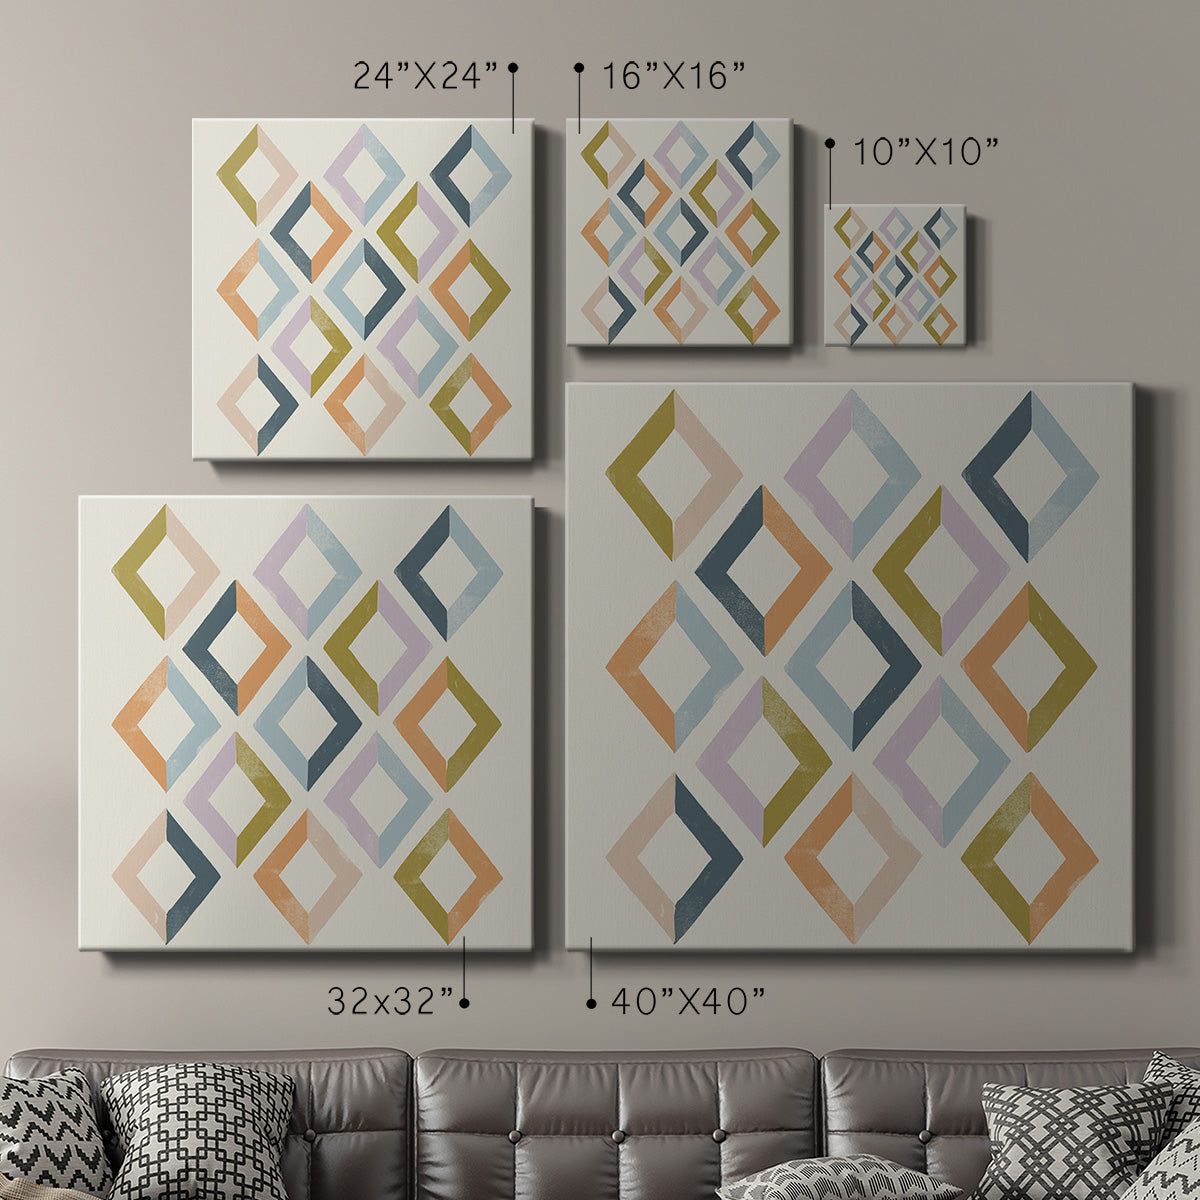 Deco Diagram III-Premium Gallery Wrapped Canvas - Ready to Hang